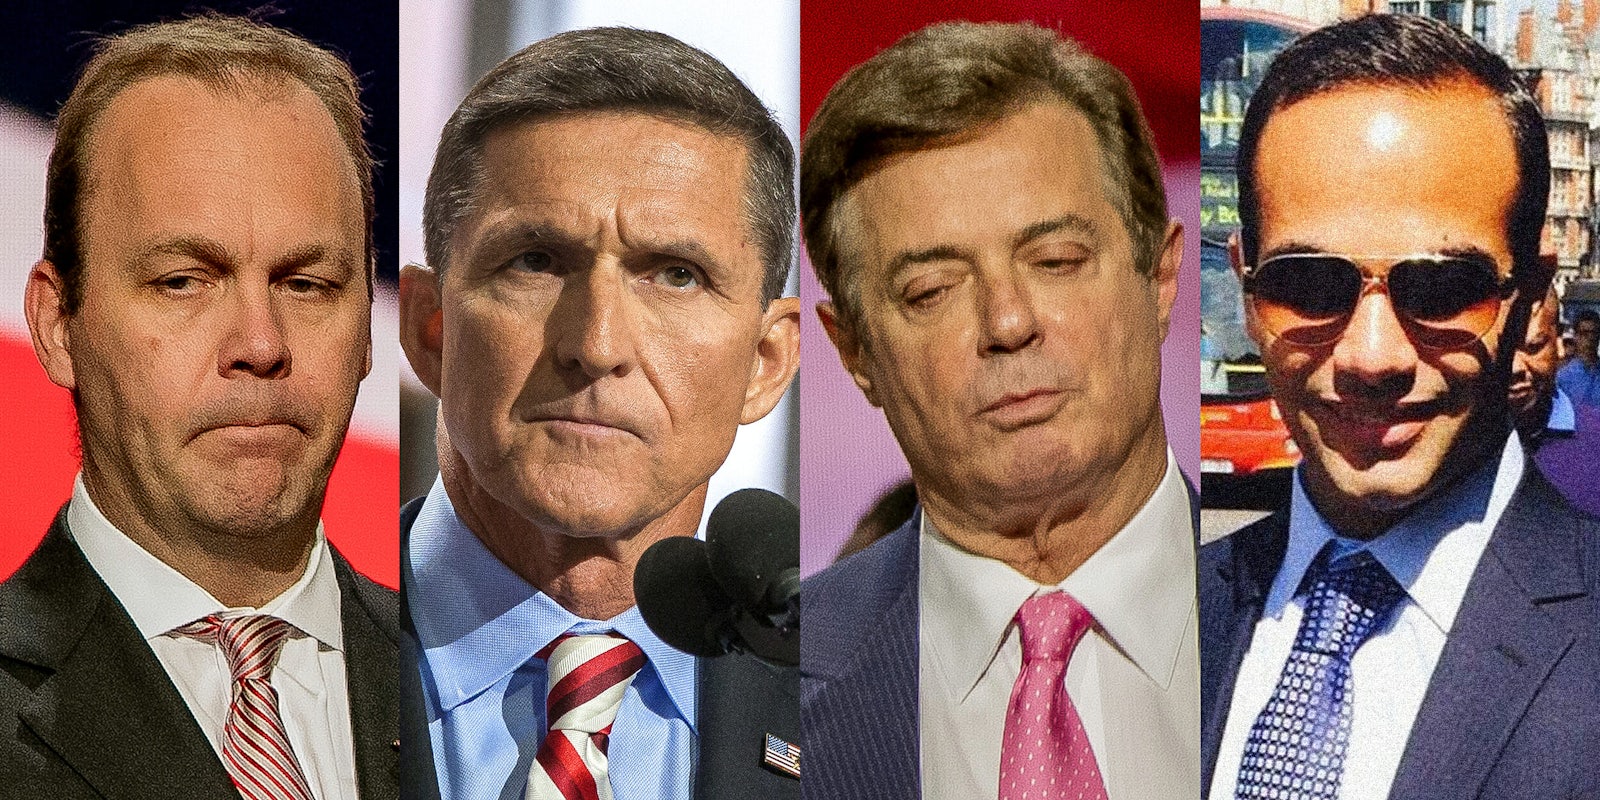 mueller charges filed: Rick Gates, Michael Flynn, Paul Manafort, George Papadopoulos